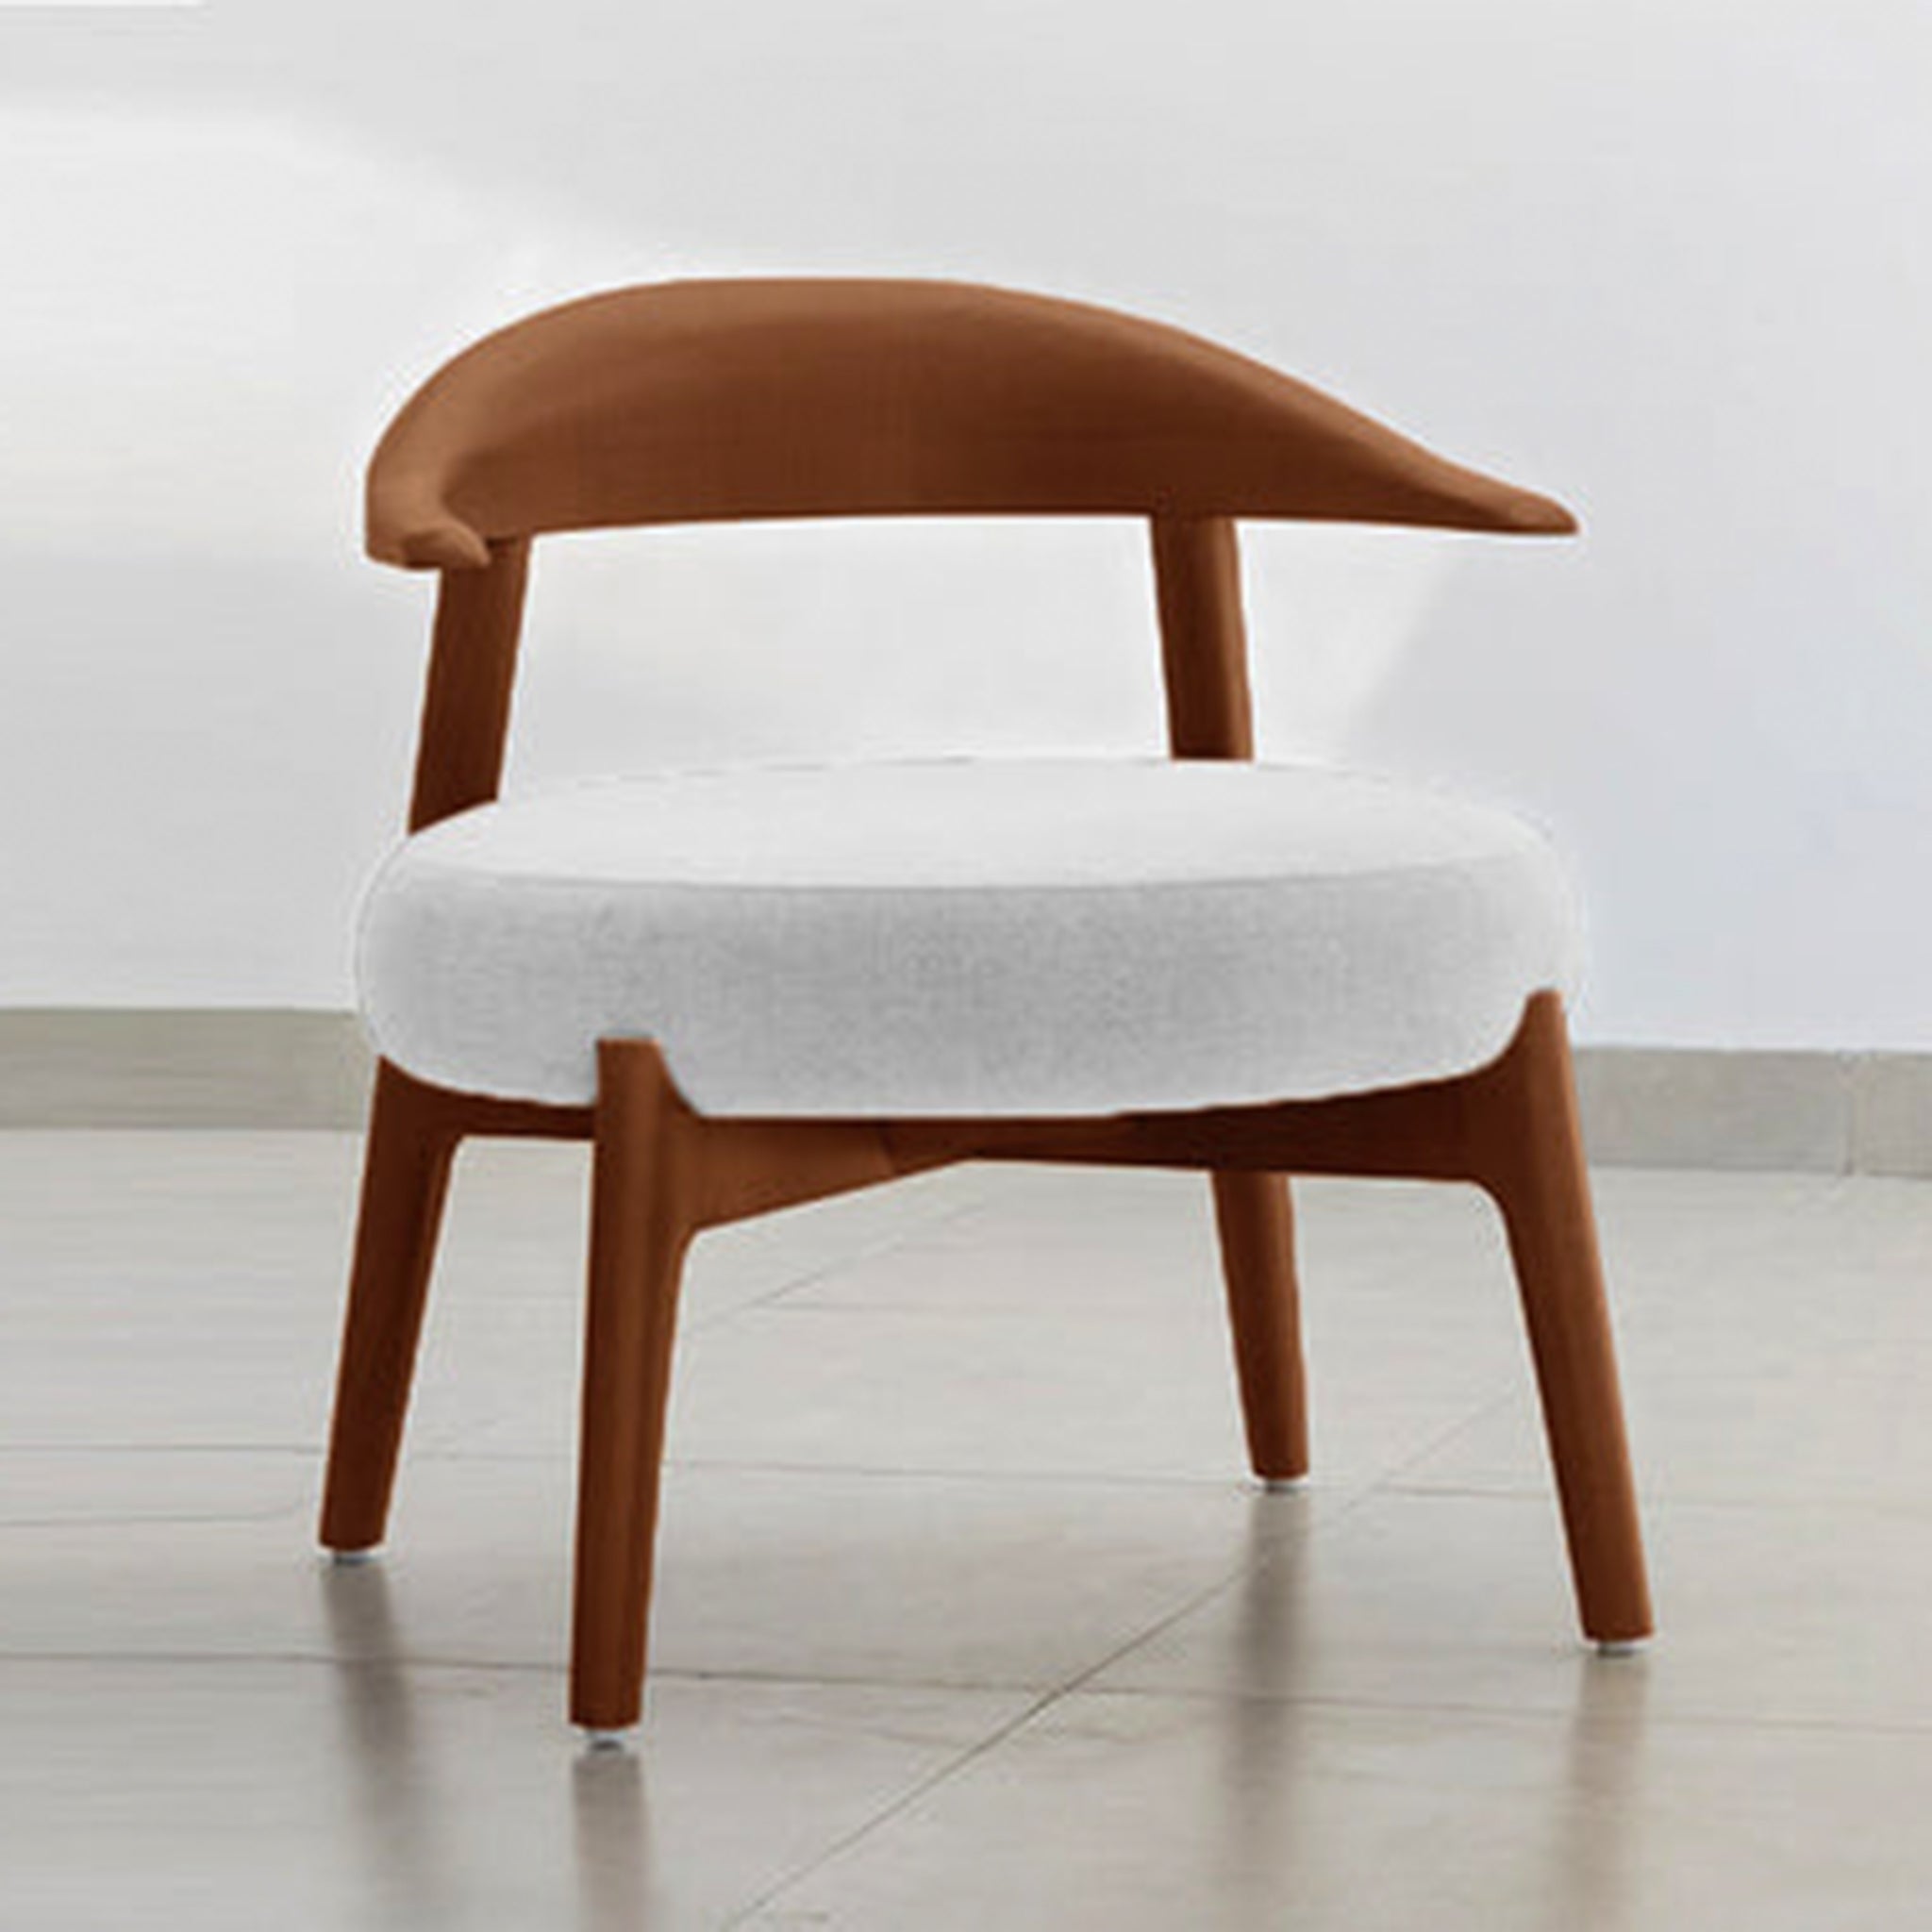 "The Hyde Accent Chair with unique wooden backrest and cushioned seat"